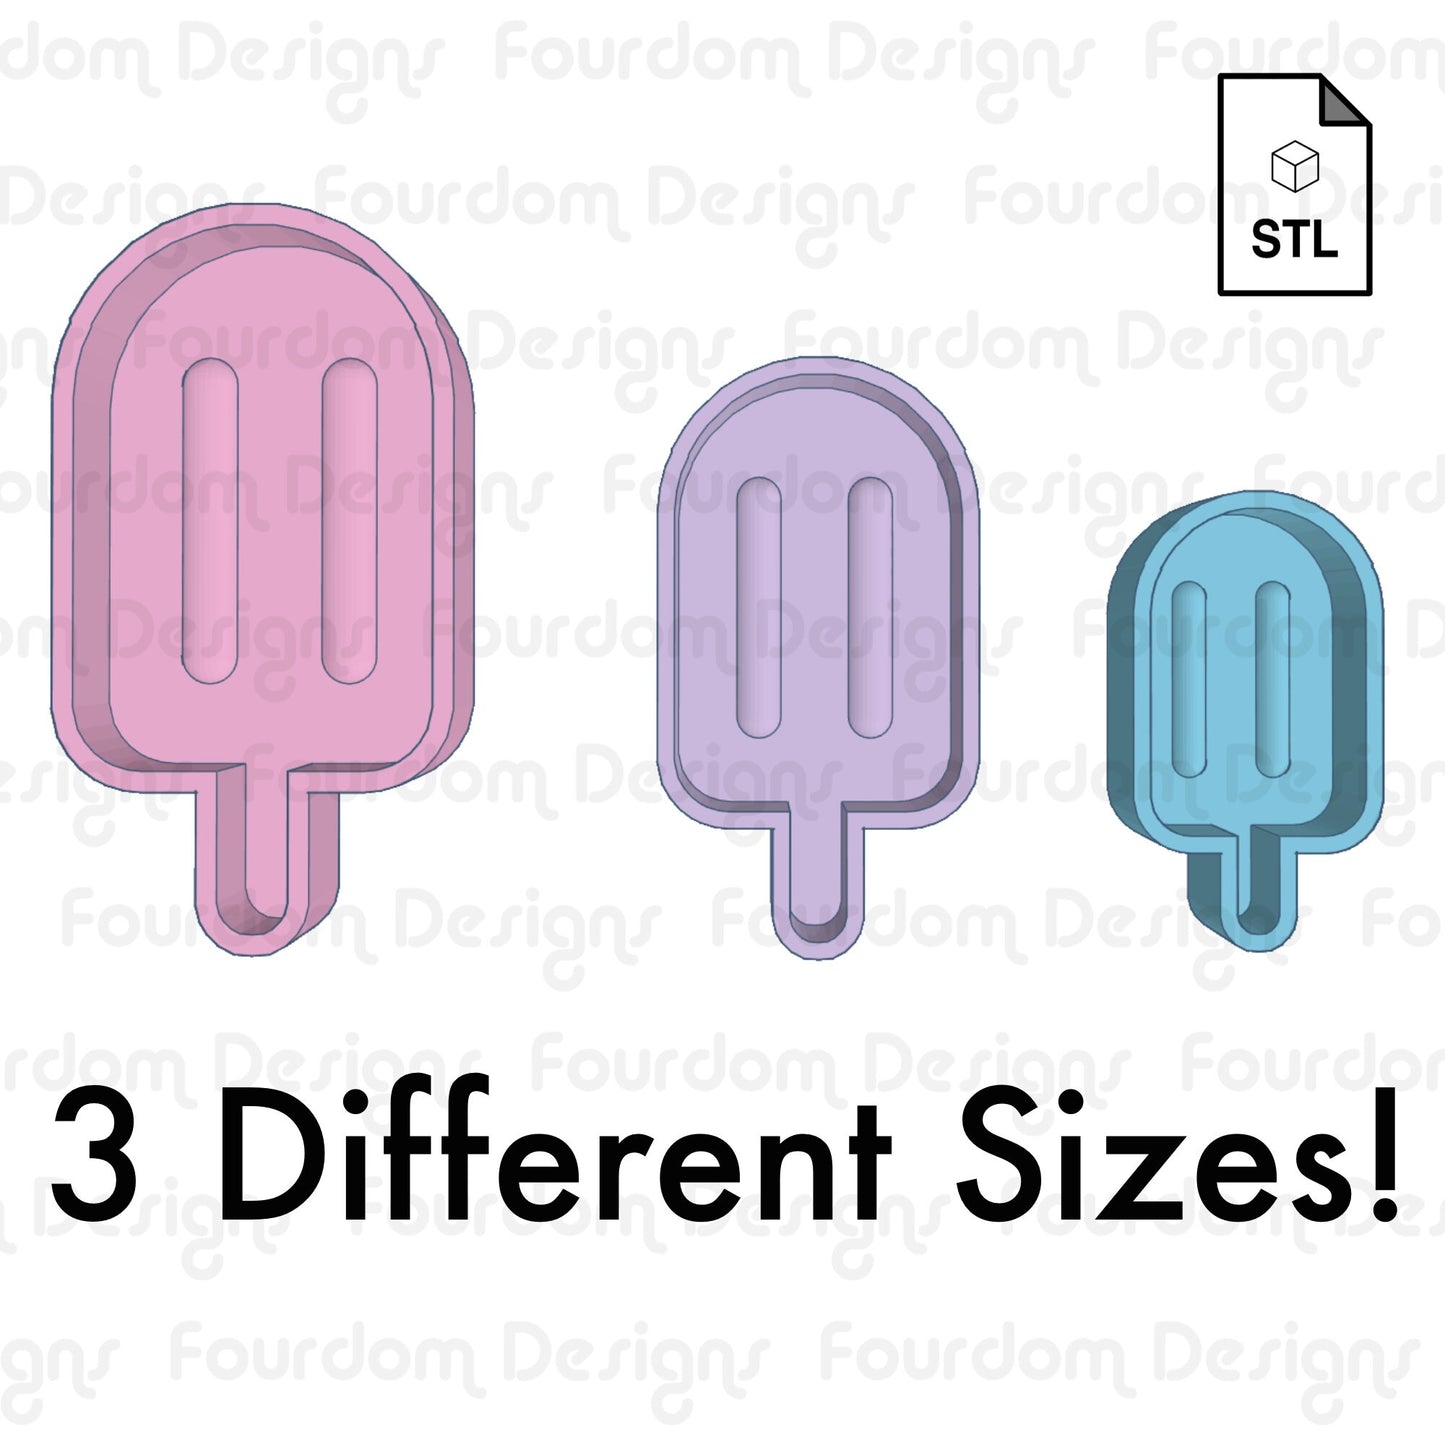 Popsicle Shaker and Resin STL File for 3D Printing for Resin Mold - Digital Download